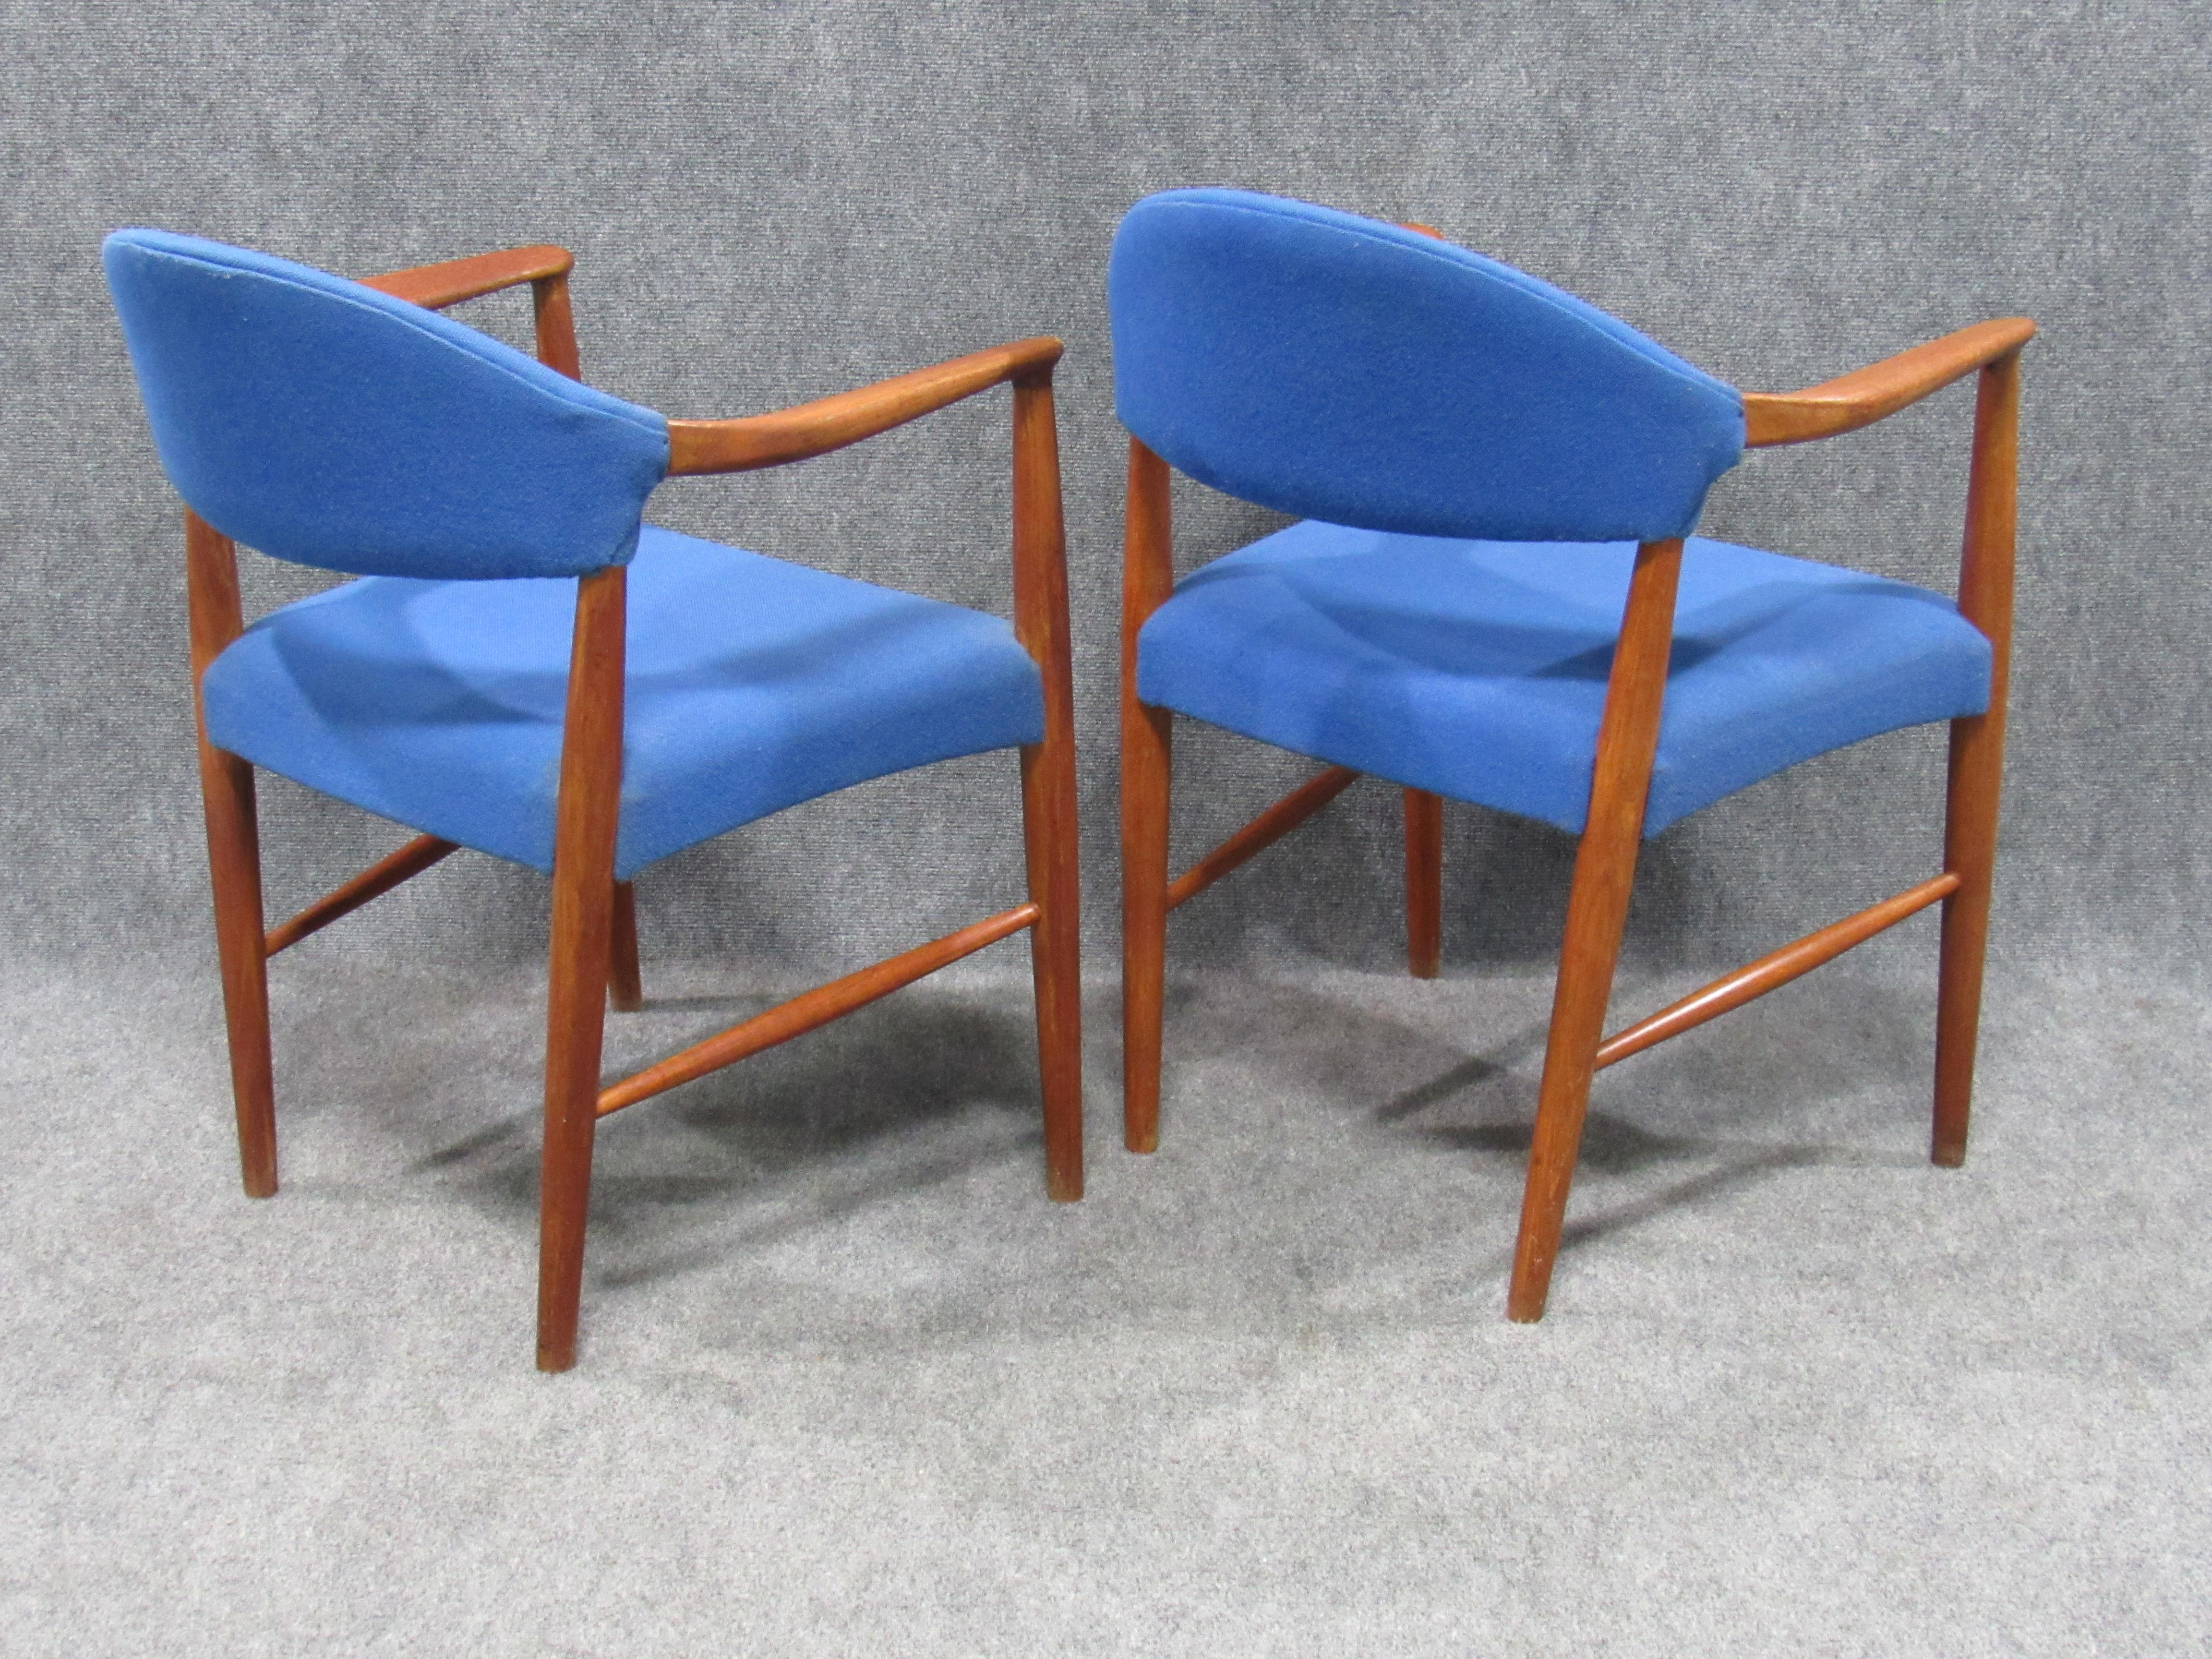 Purchased in Denmark, this pair of Danish Mid-Century Modern teak and blue wool lounge armchairs is attributed to one of the greatest chair designers of the mid-century - Hans Wegner. Gentle curves of the back and the uprightness of the frame are